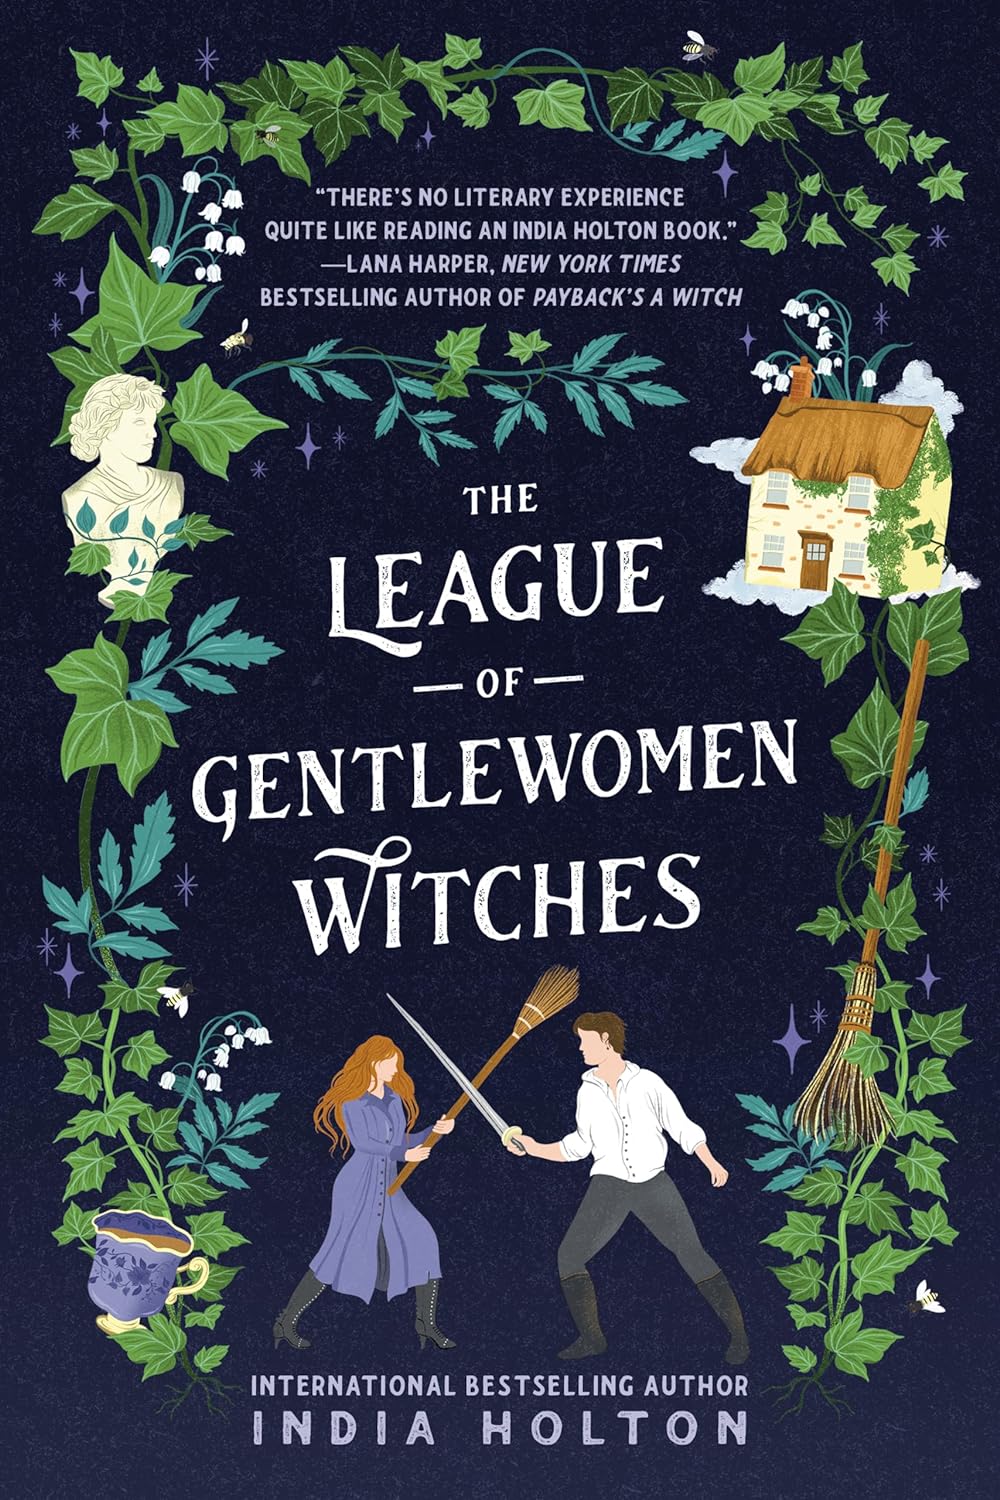 The League of Gentlewomen Witches (Dangerous Damsels) - by India Holton